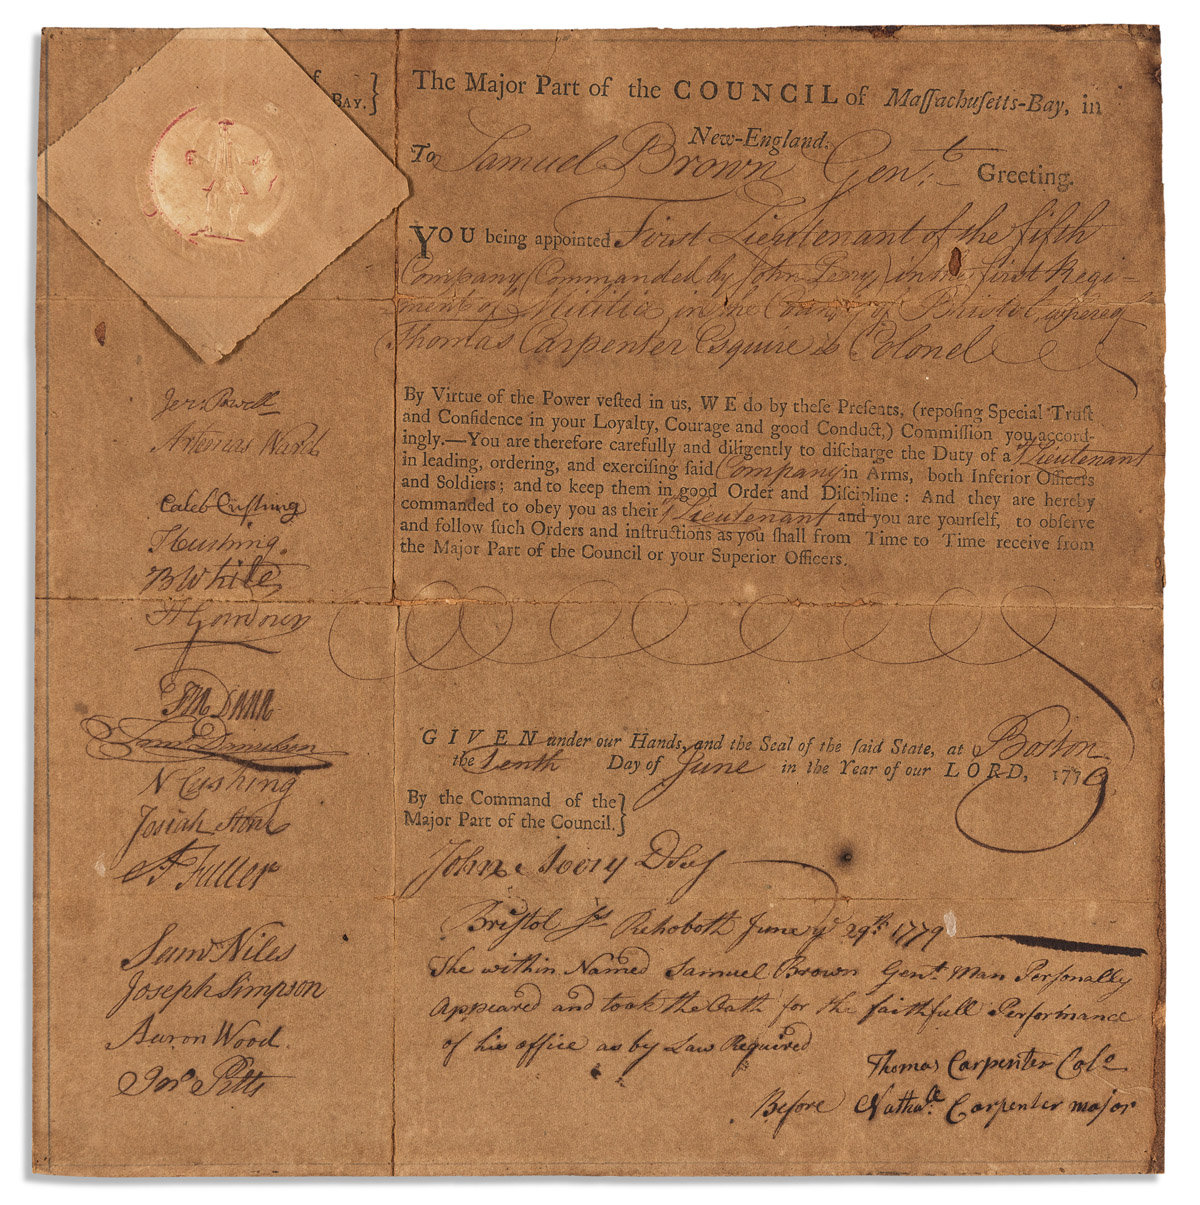 (AMERICAN REVOLUTION.) Partly-printed Document Signed, by 15 members of the Council of Massachusetts Bay, military commission appointin